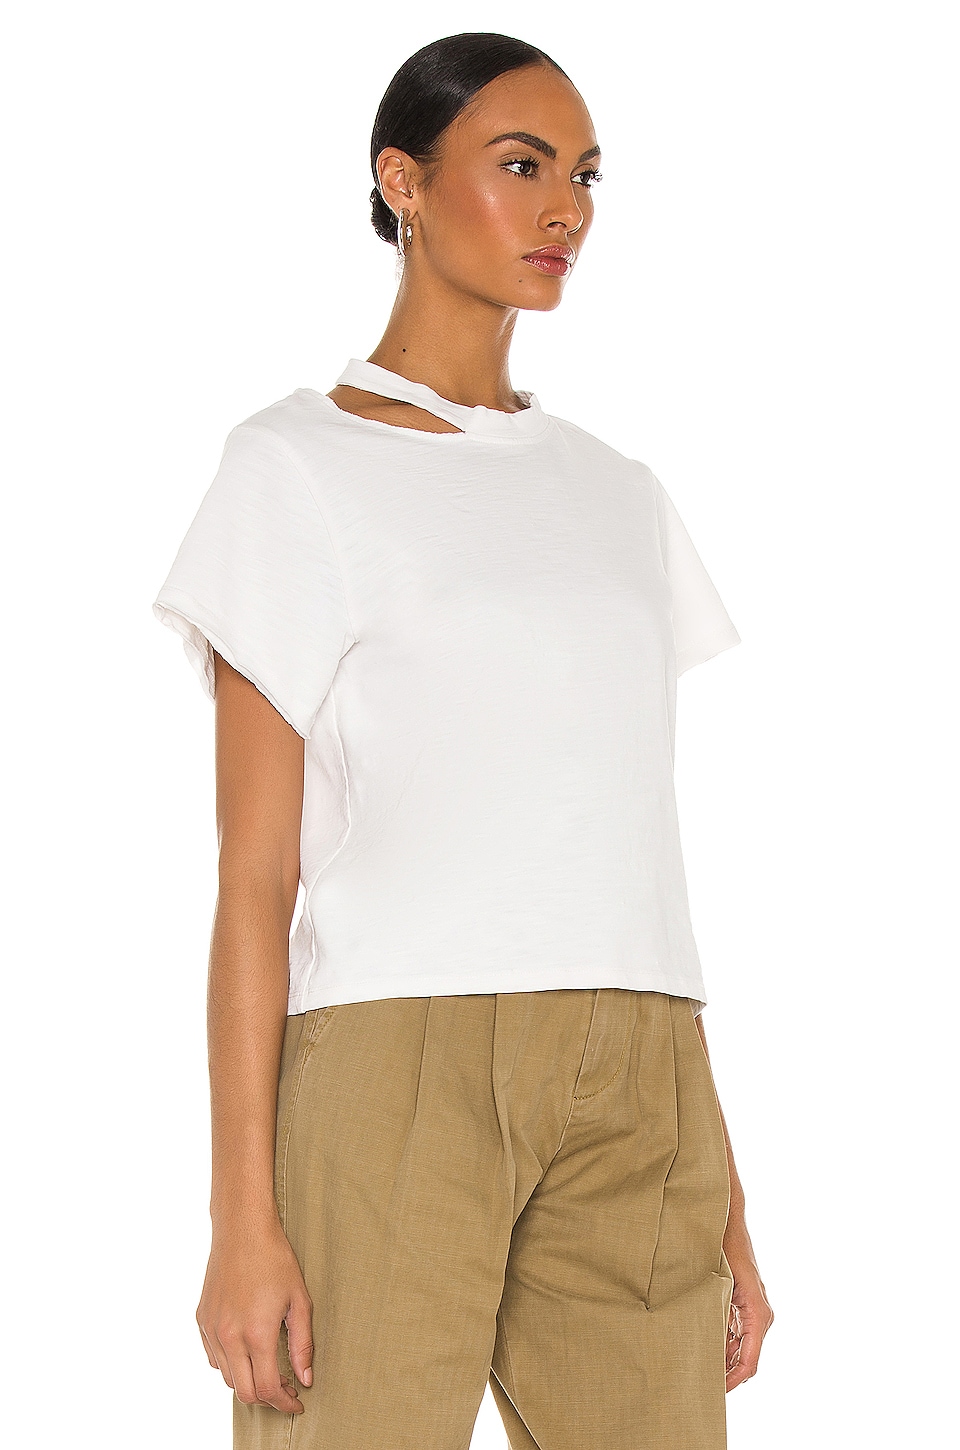 Marissa Webb Tate Cut Out Tee in White | REVOLVE